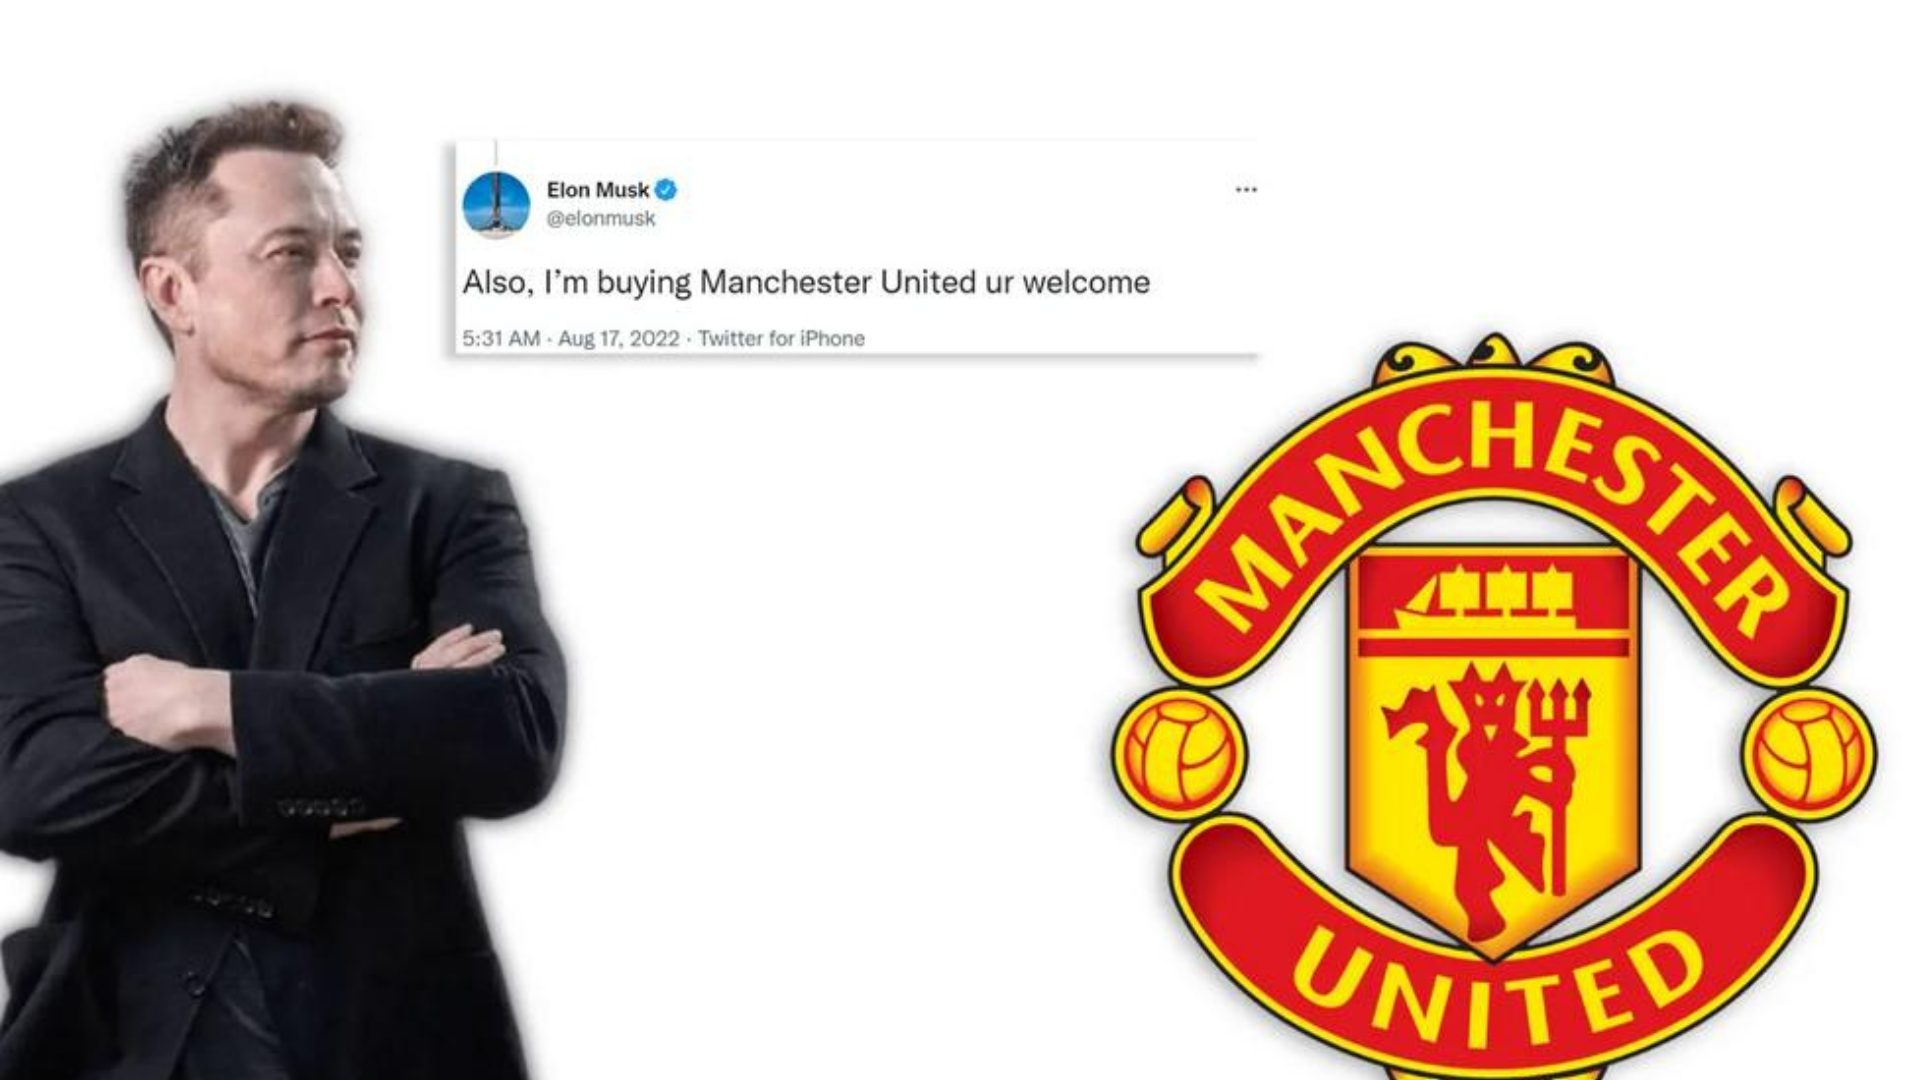 Elon Musk wearing black coat on the left with Manchester United Football Club logo on the right